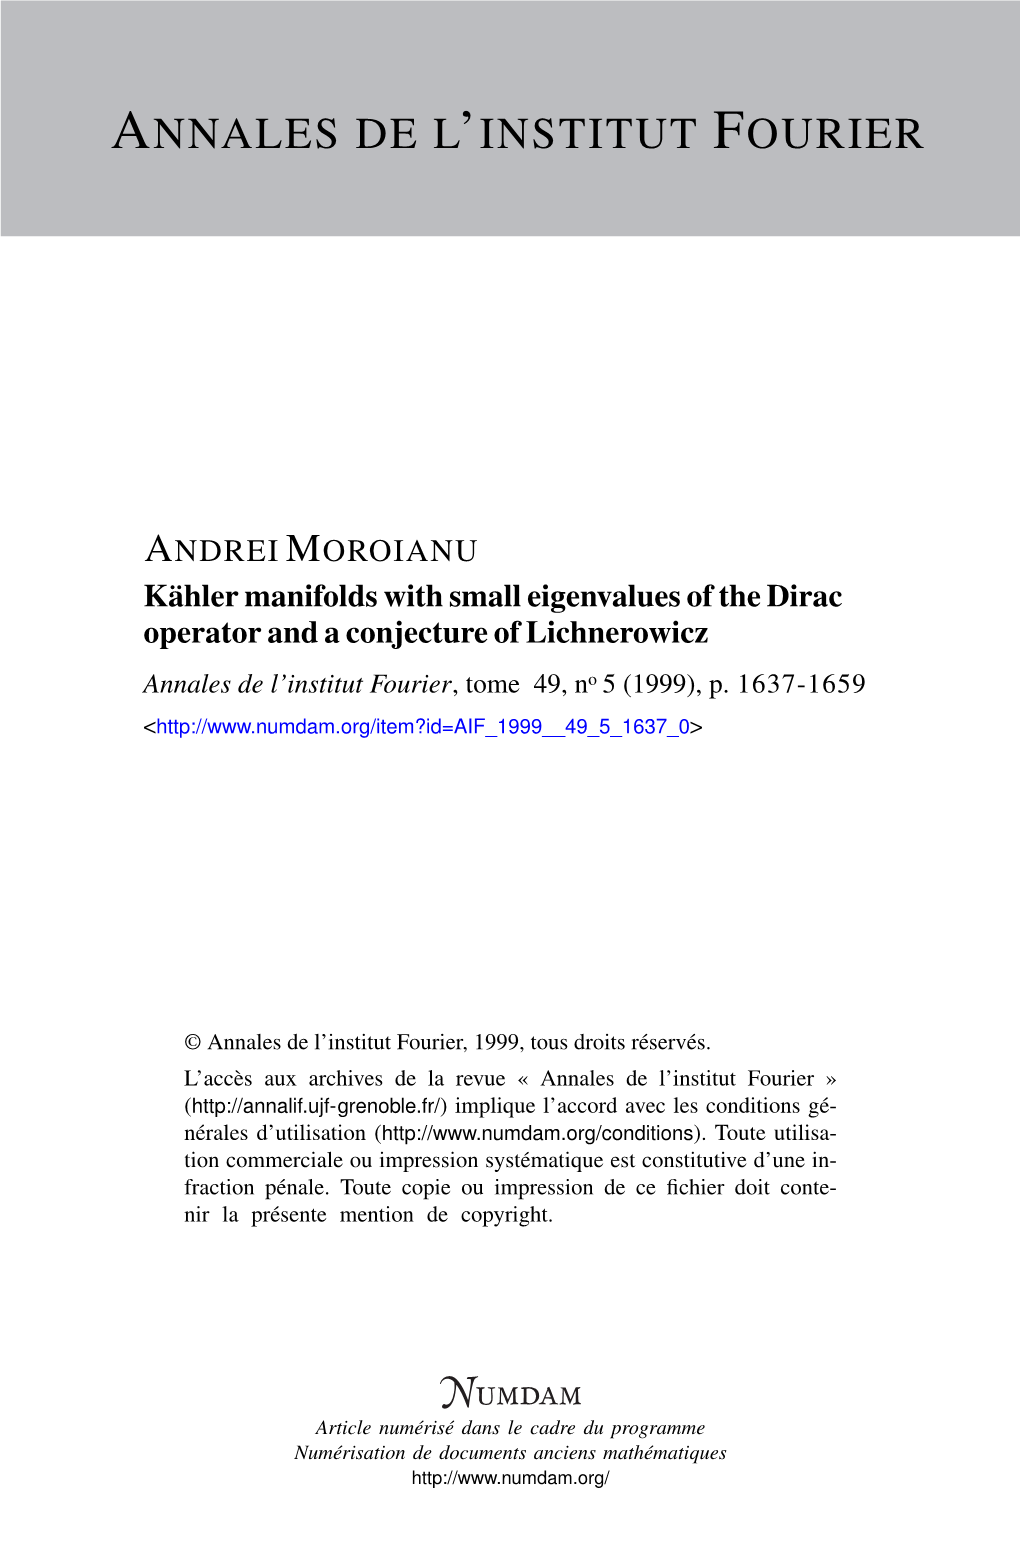 Kähler Manifolds with Small Eigenvalues of the Dirac Operator and a Conjecture of Lichnerowicz Annales De L’Institut Fourier, Tome 49, No 5 (1999), P